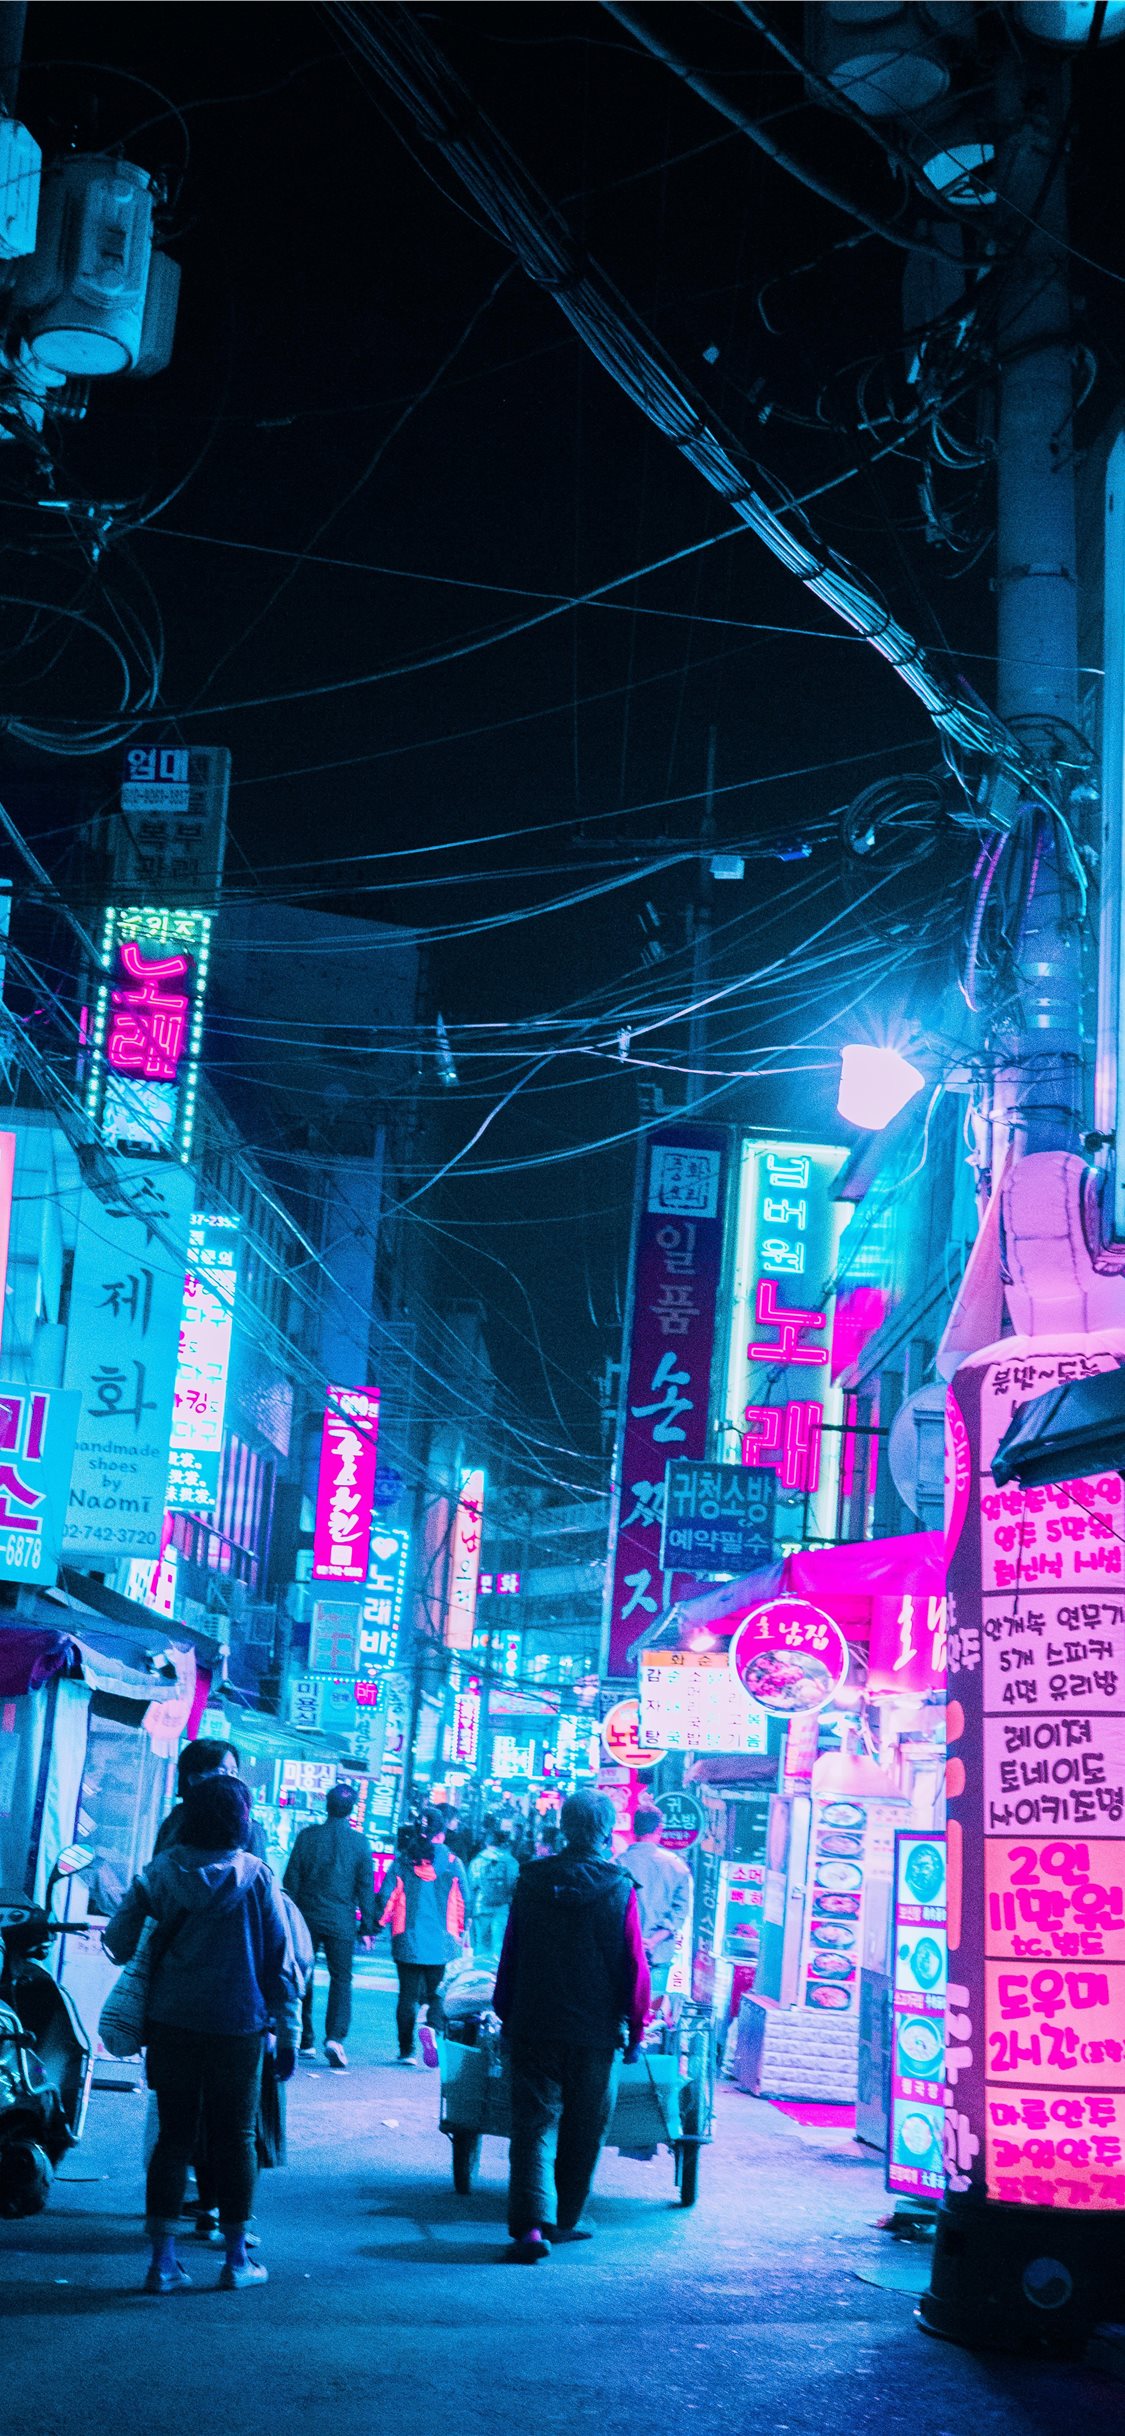 Seoul iPhone X Wallpapers Free Download